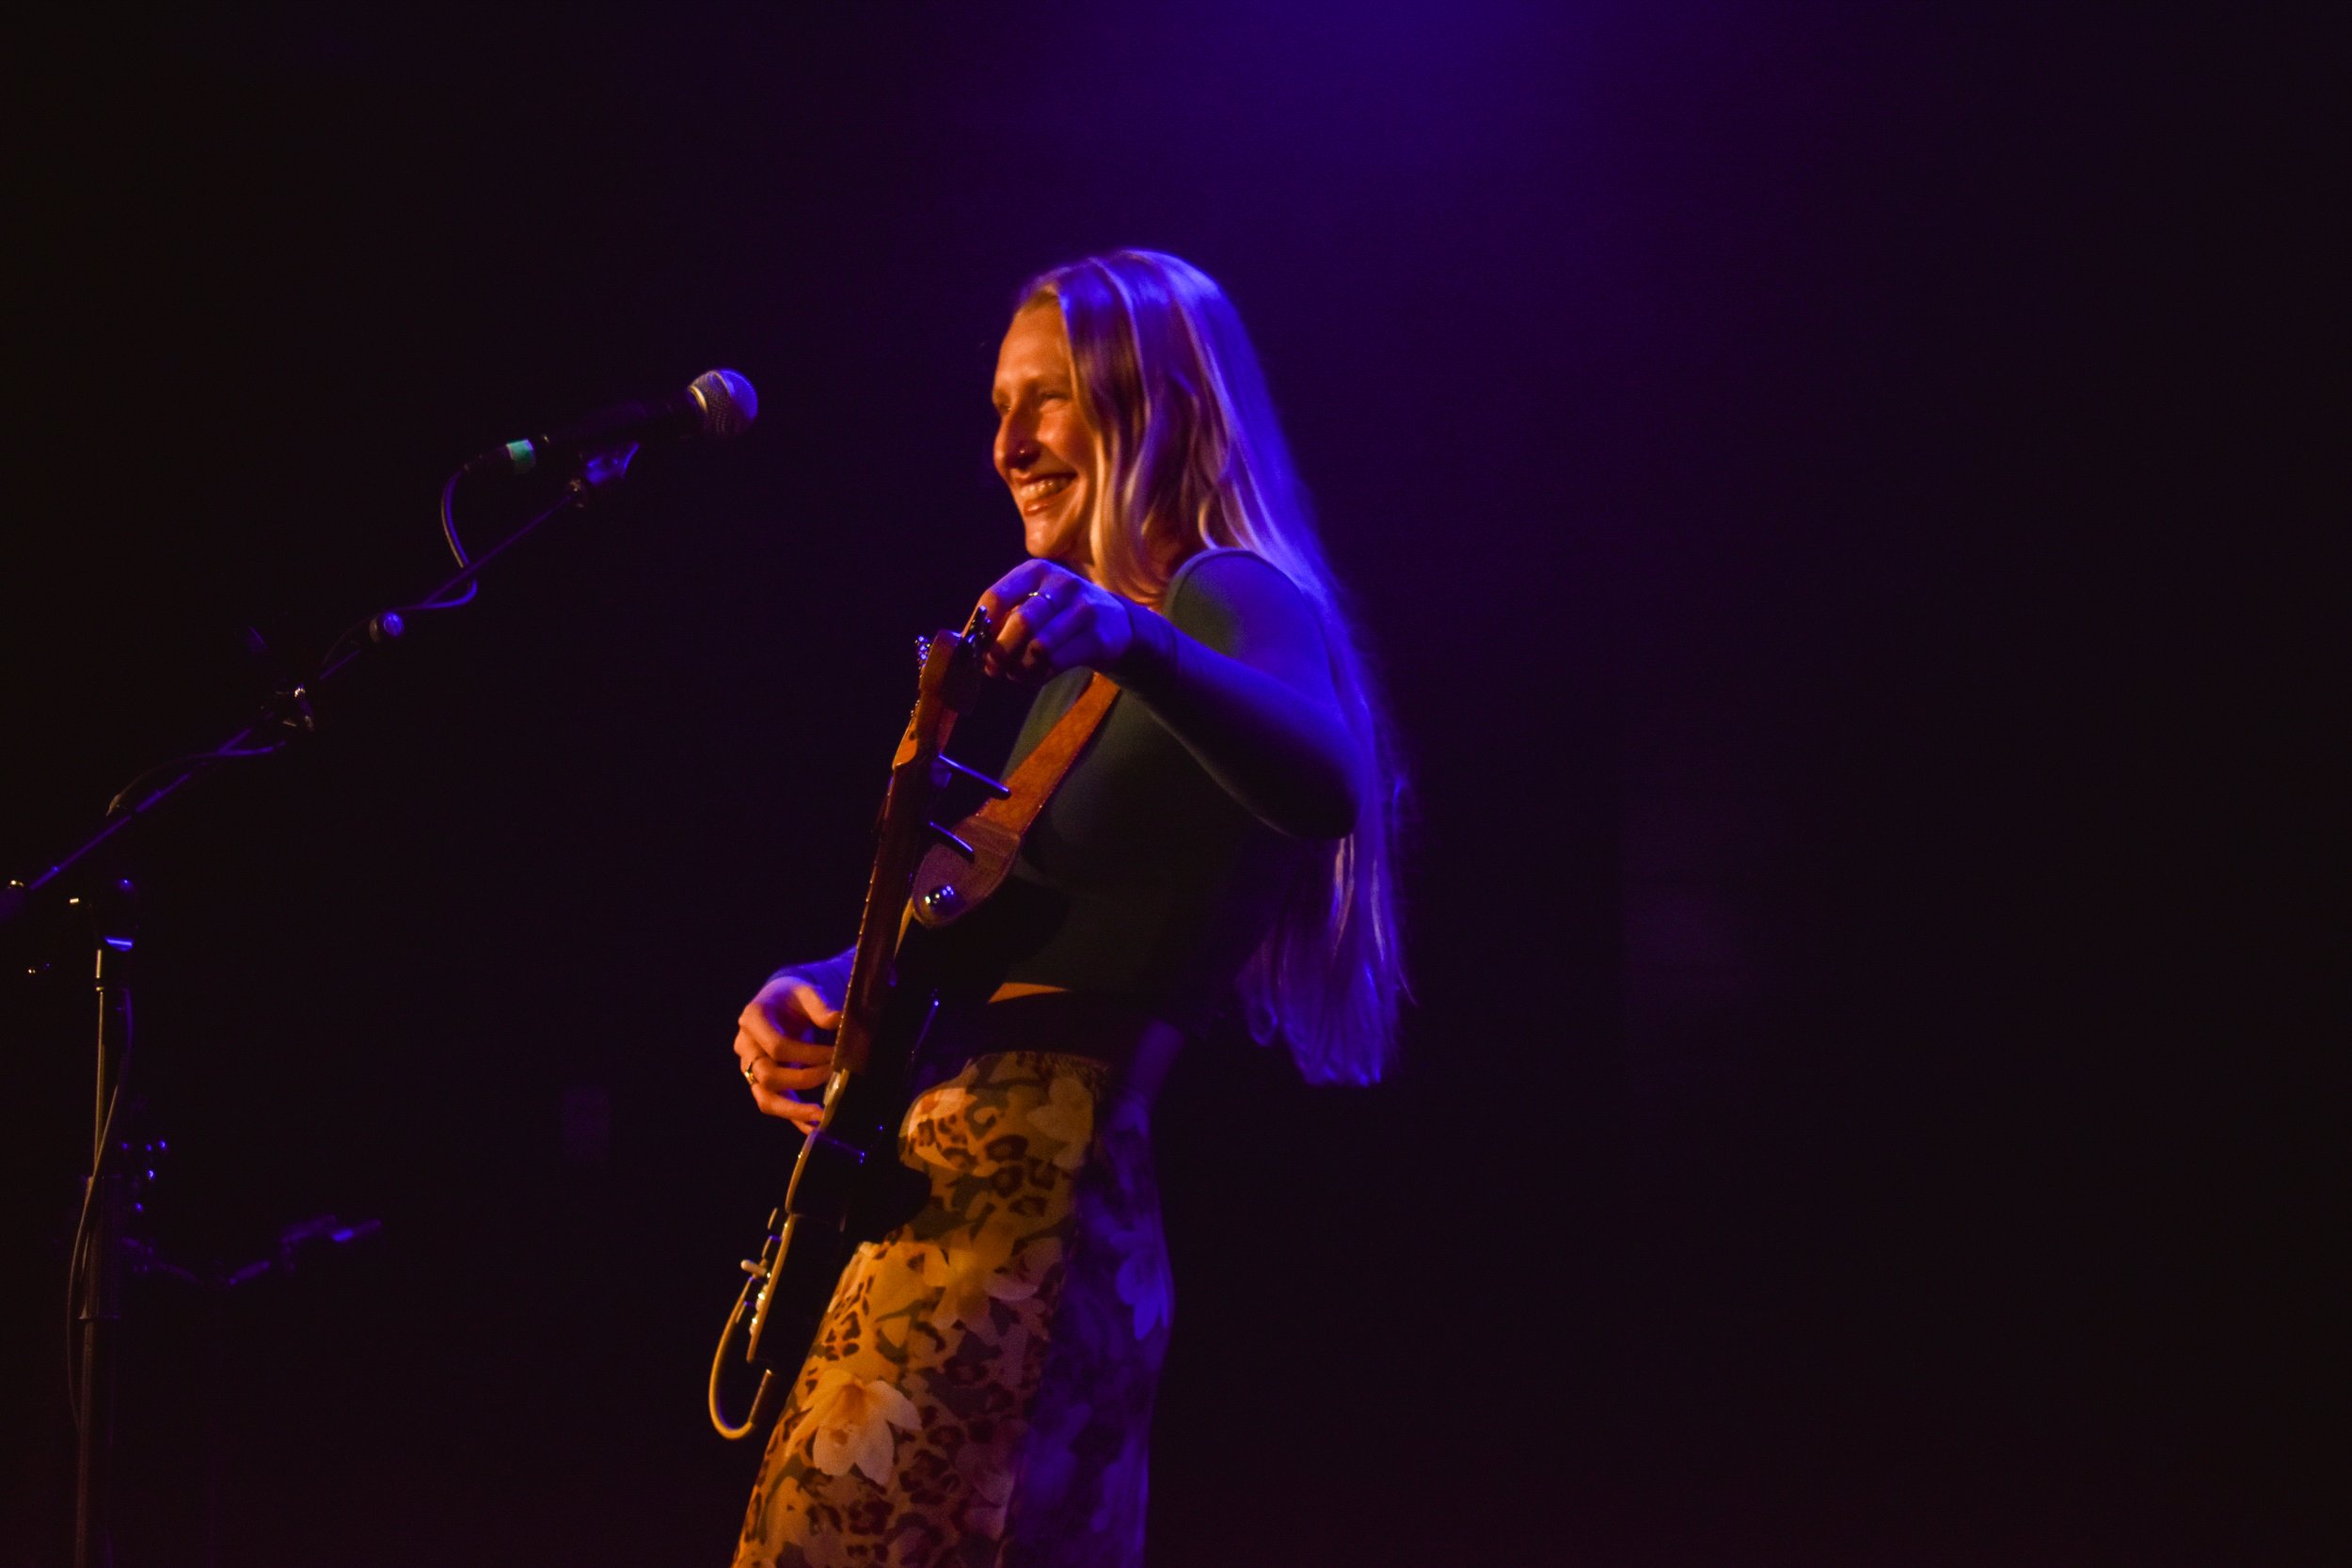  Billie Marten adjusts her guitar and begins to sing “Toulouse,” an emotional song about her time working as a bartender in London. 